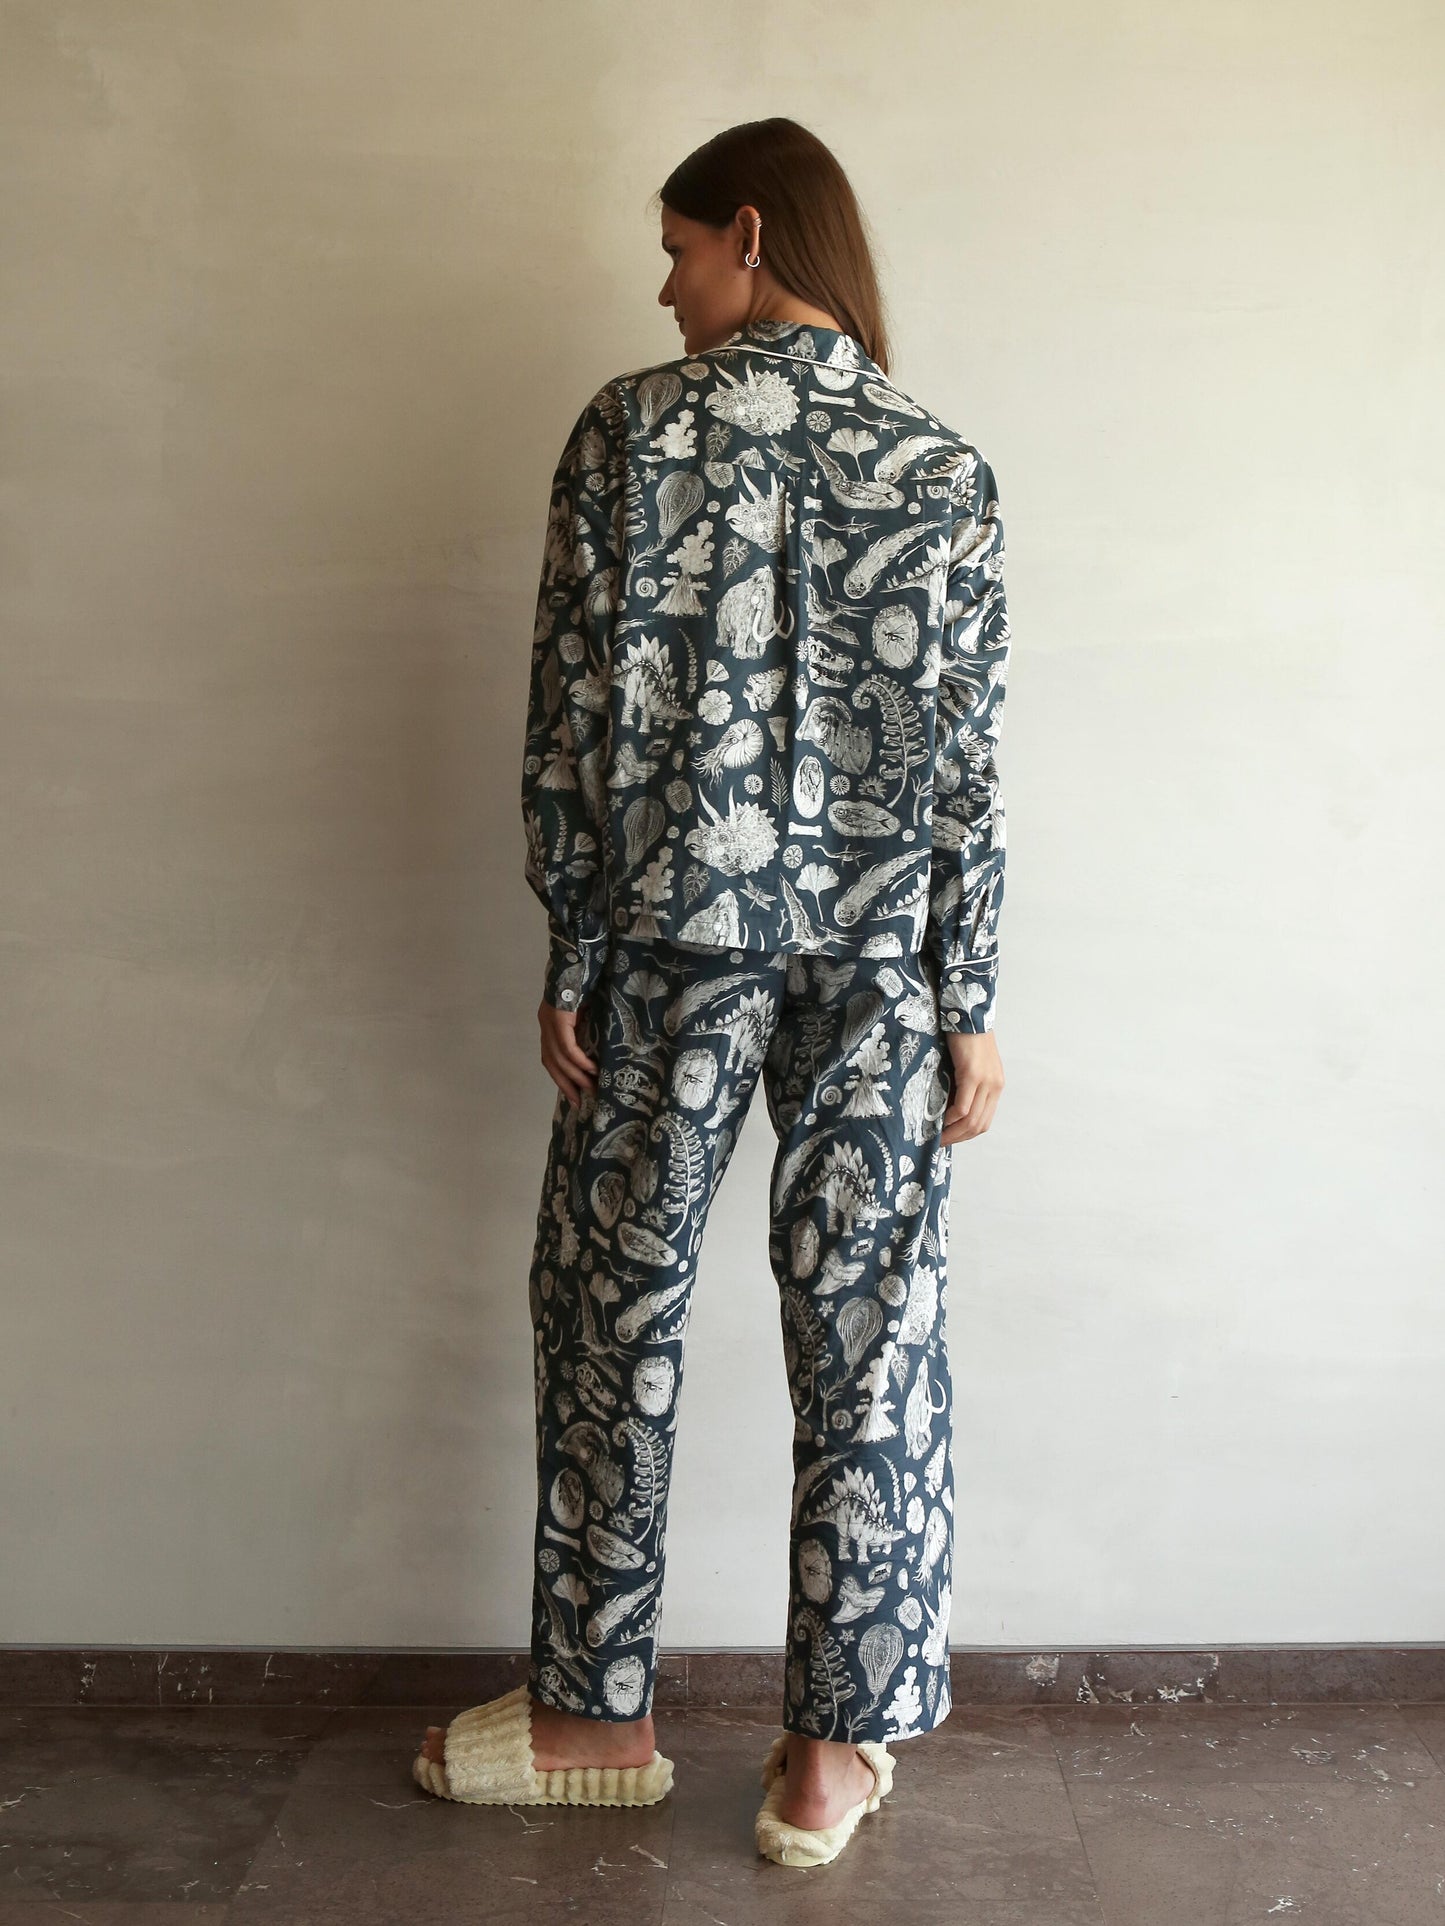 This high-quality womens Pj features the beautiful prehistoric dinosaurier illustrations by tattoo artist Suflanda. It coomes with boxy shaped long-sleeve shirt and long pants with Elasticated waist with drawstring.